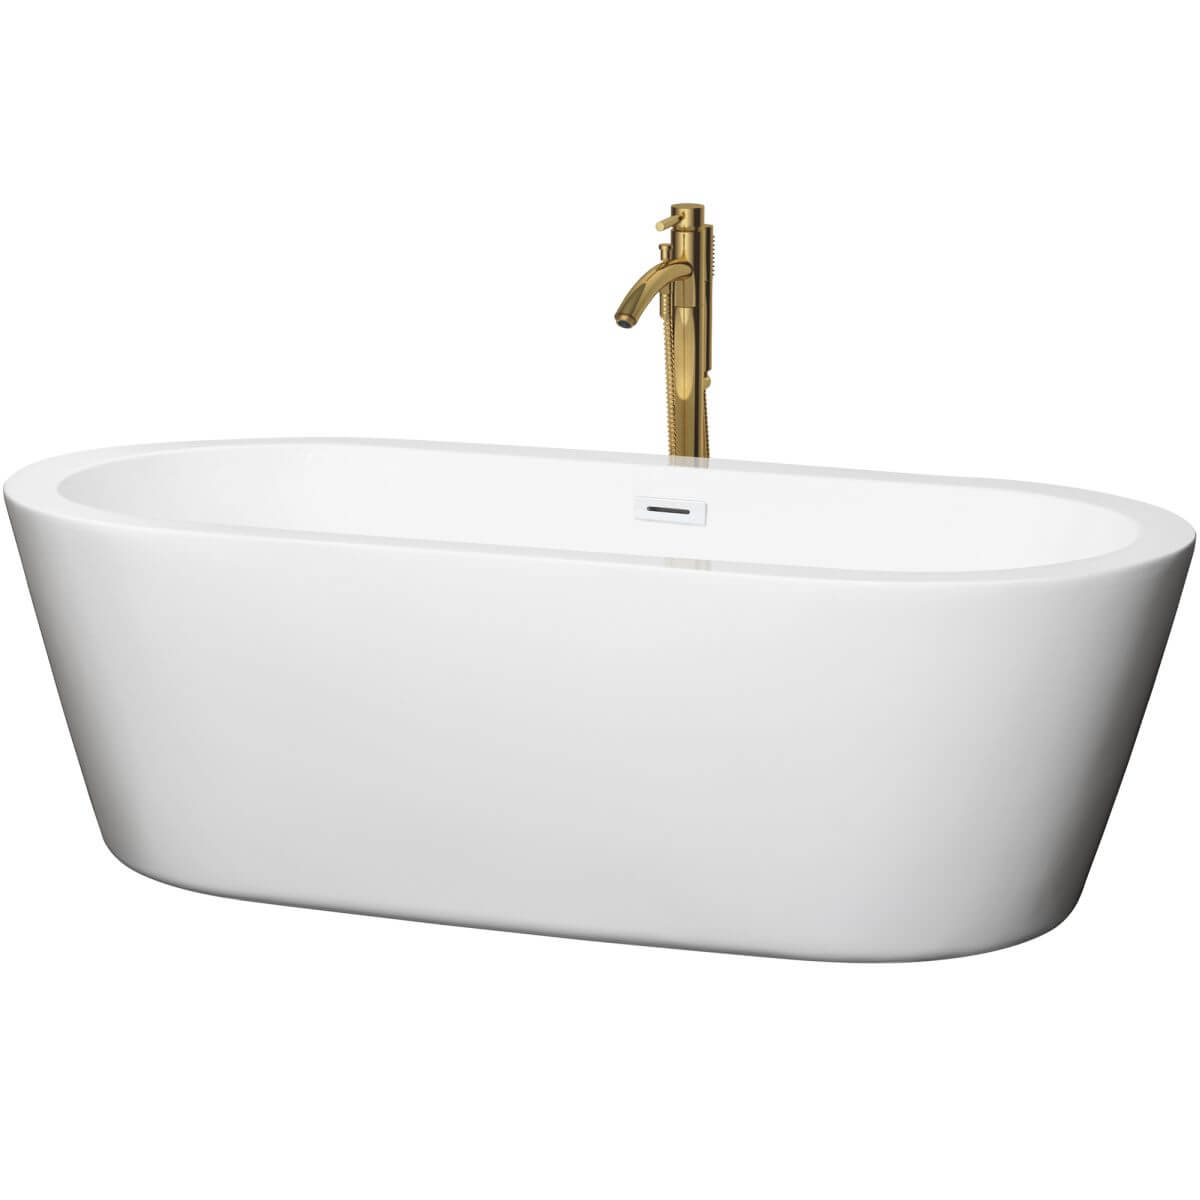 Wyndham Collection Mermaid 71 inch Freestanding Bathtub in White with Shiny White Trim and Floor Mounted Faucet in Brushed Gold - WCOBT100371SWATPGD